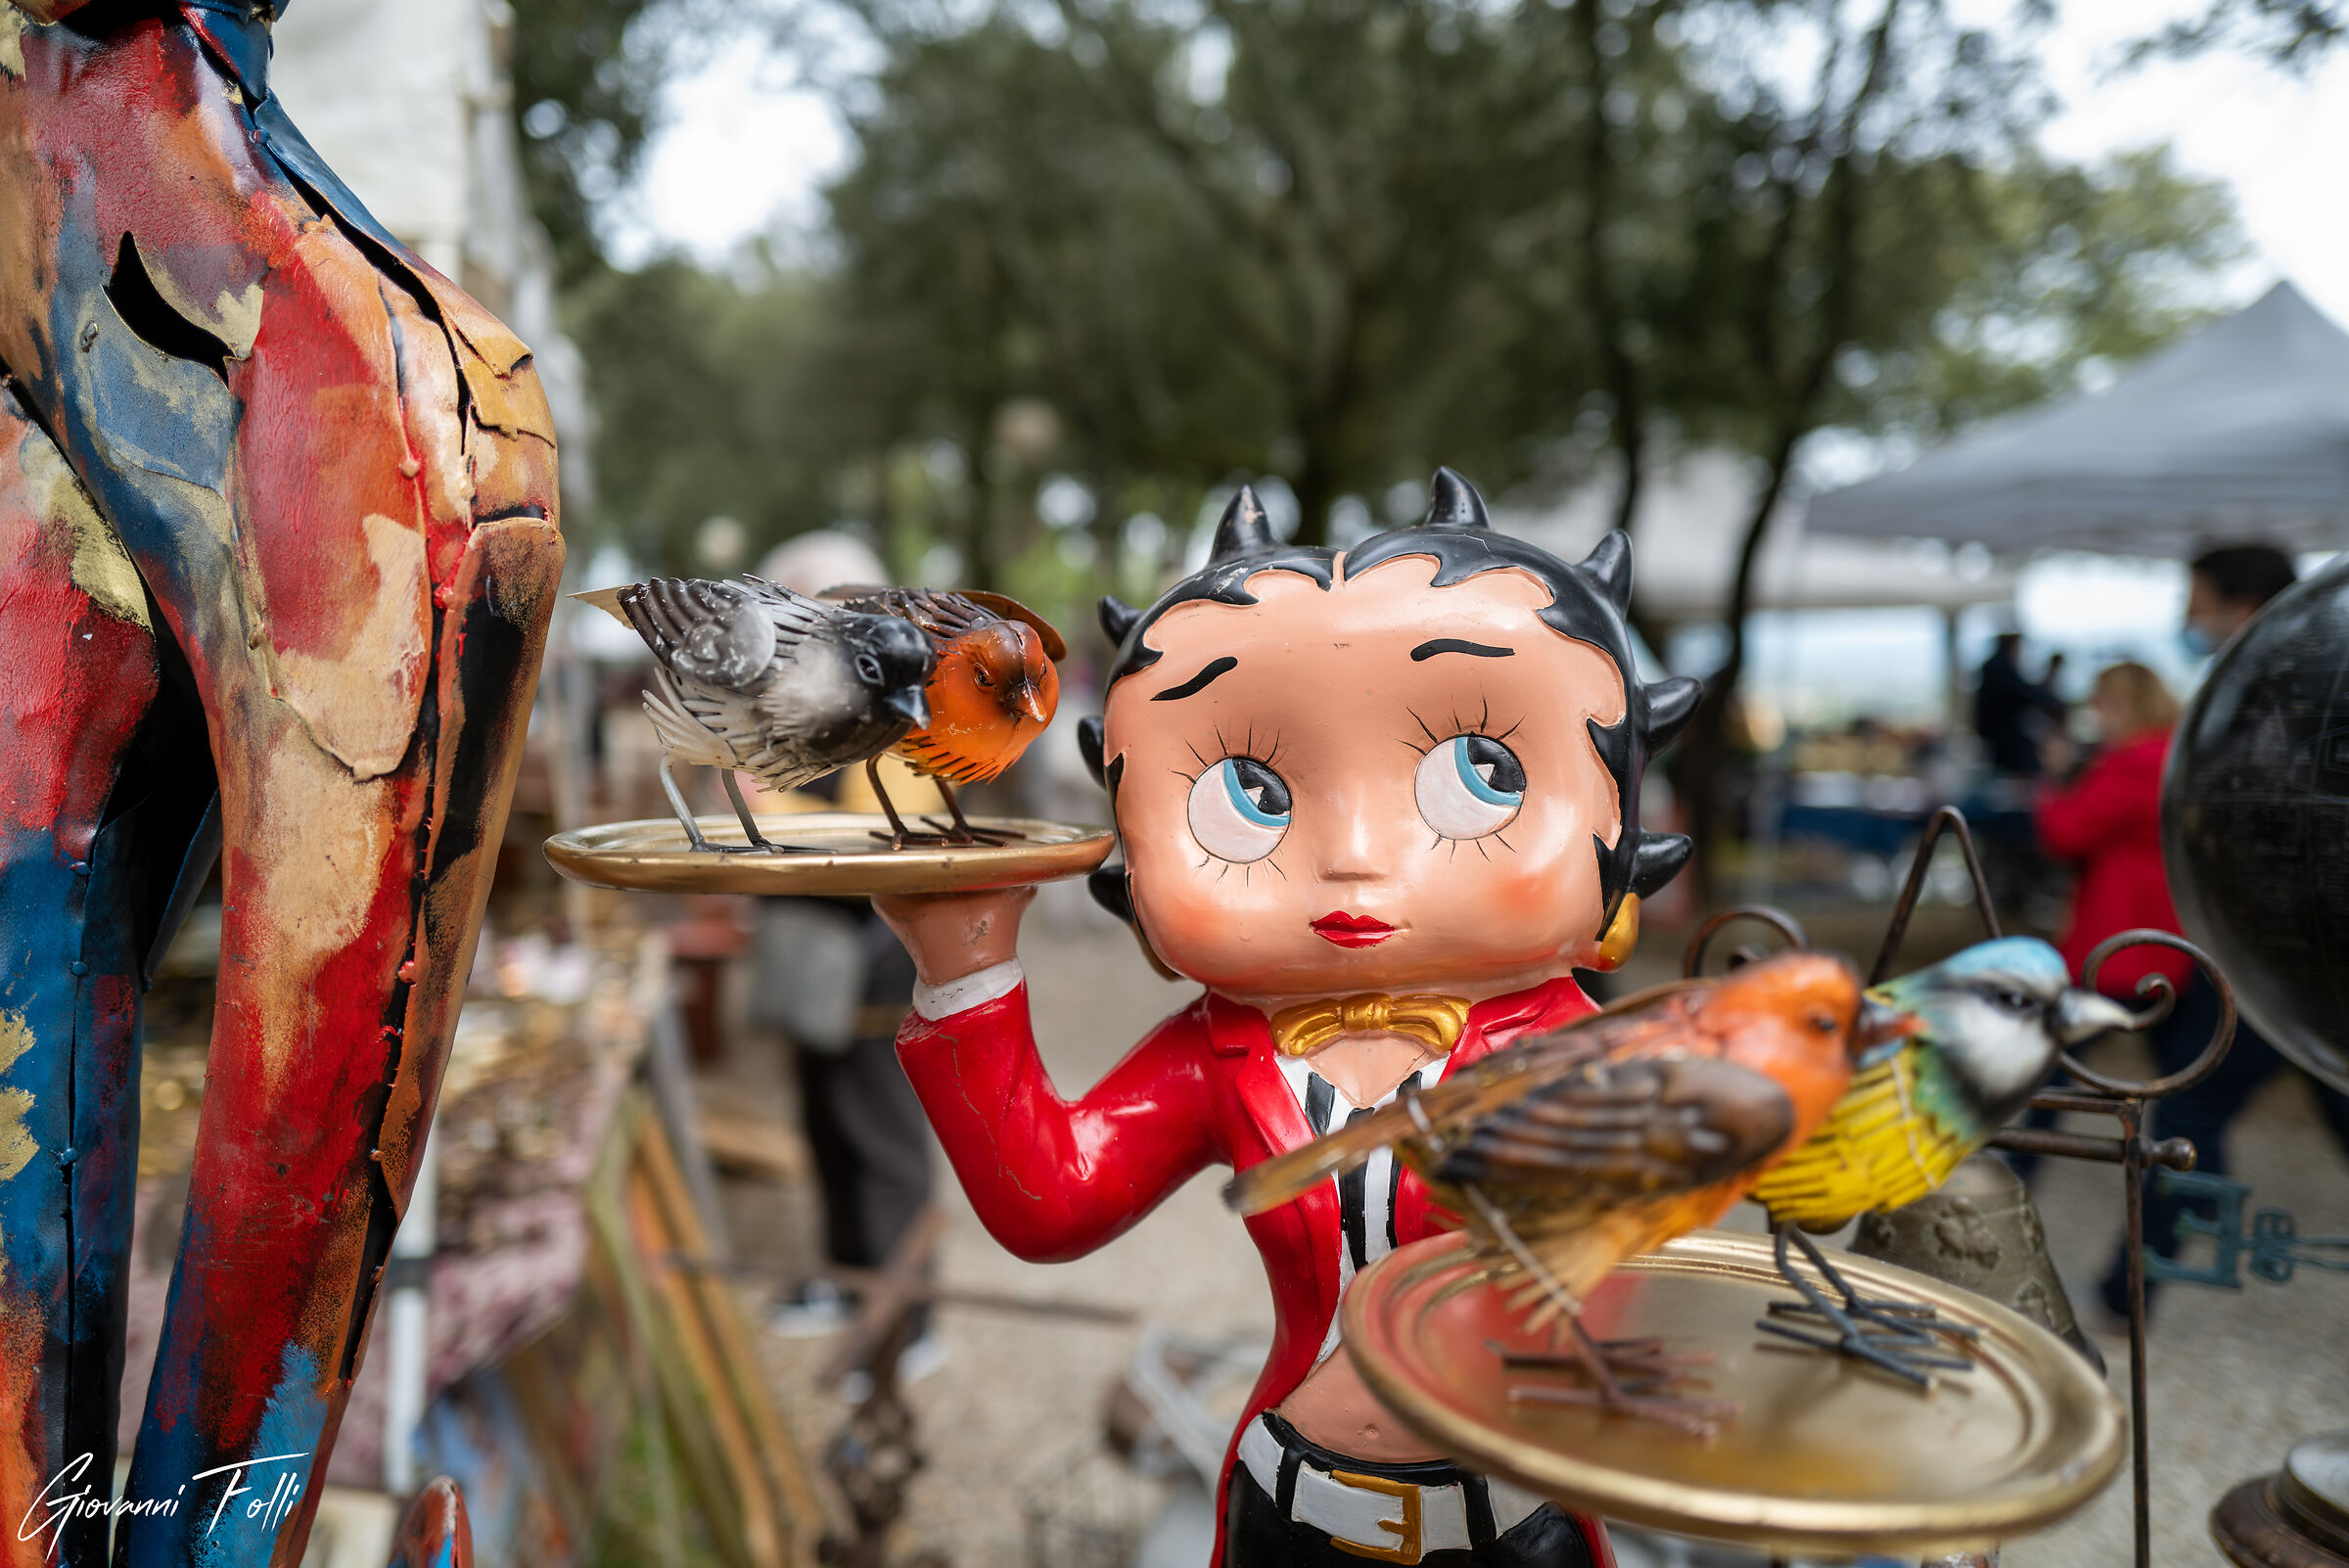 Betty Boop at arezzo antiques fair...